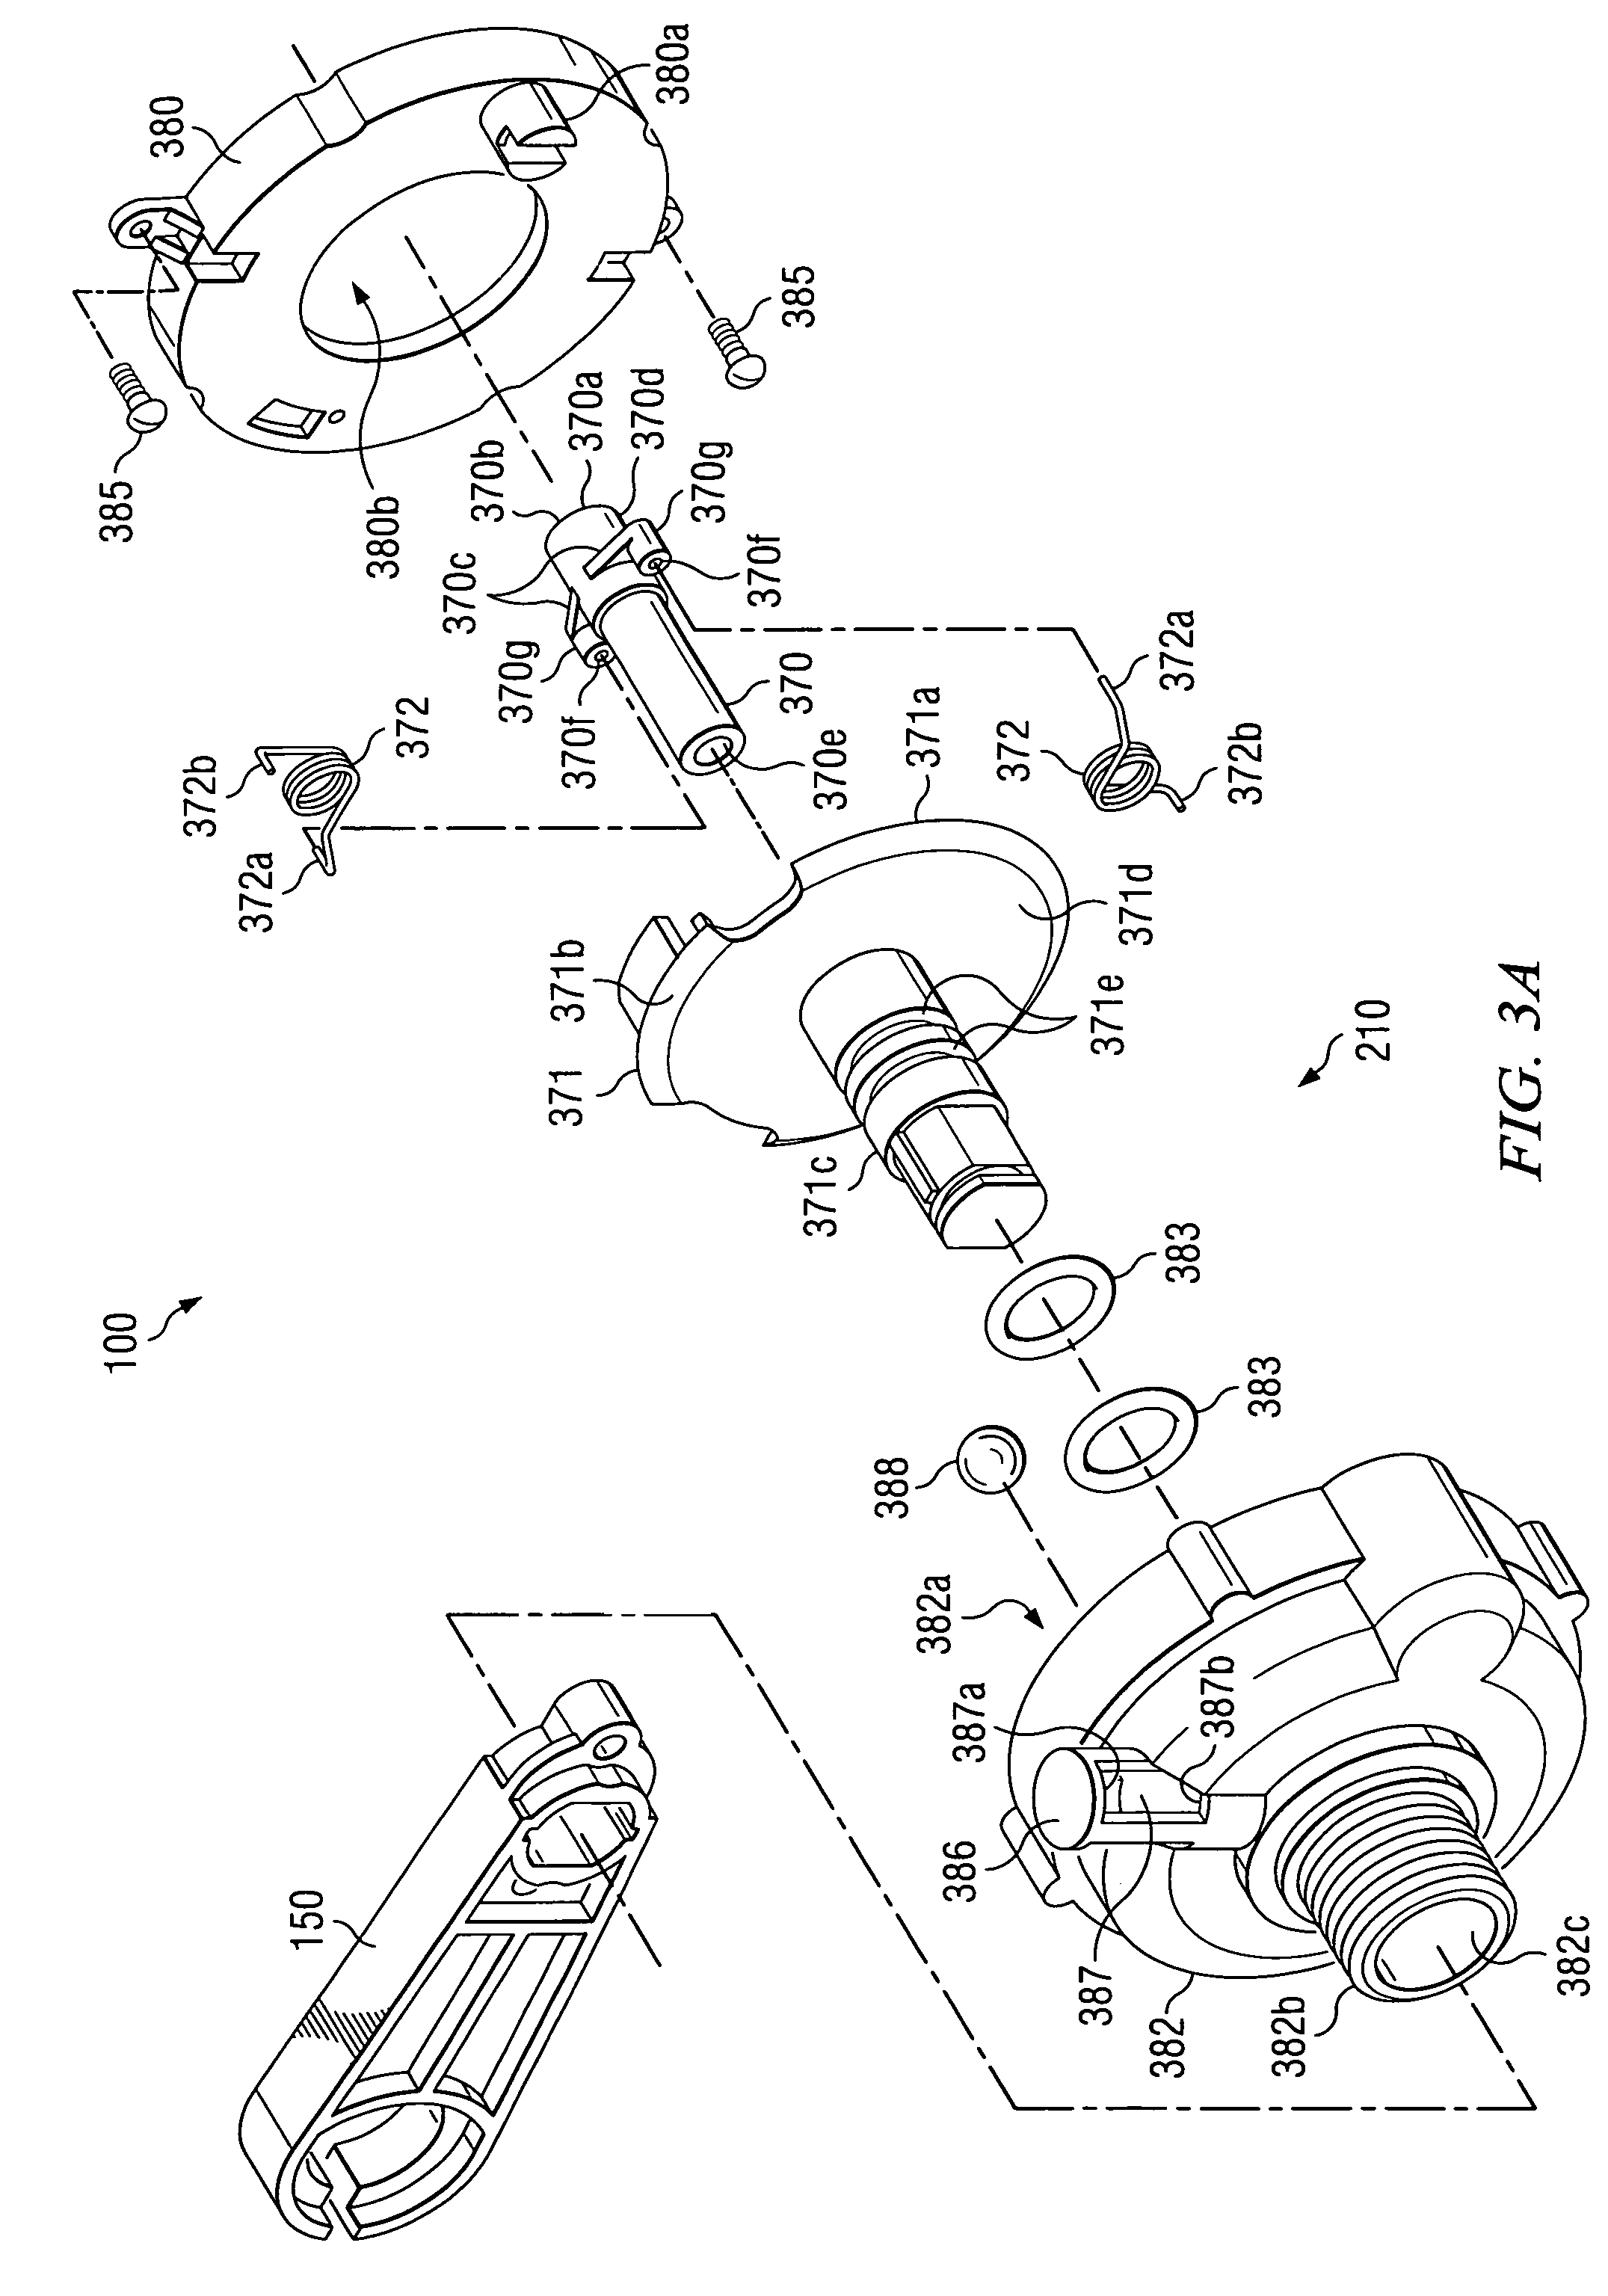 Multiple arc chamber assemblies for a fault interrupter and load break switch